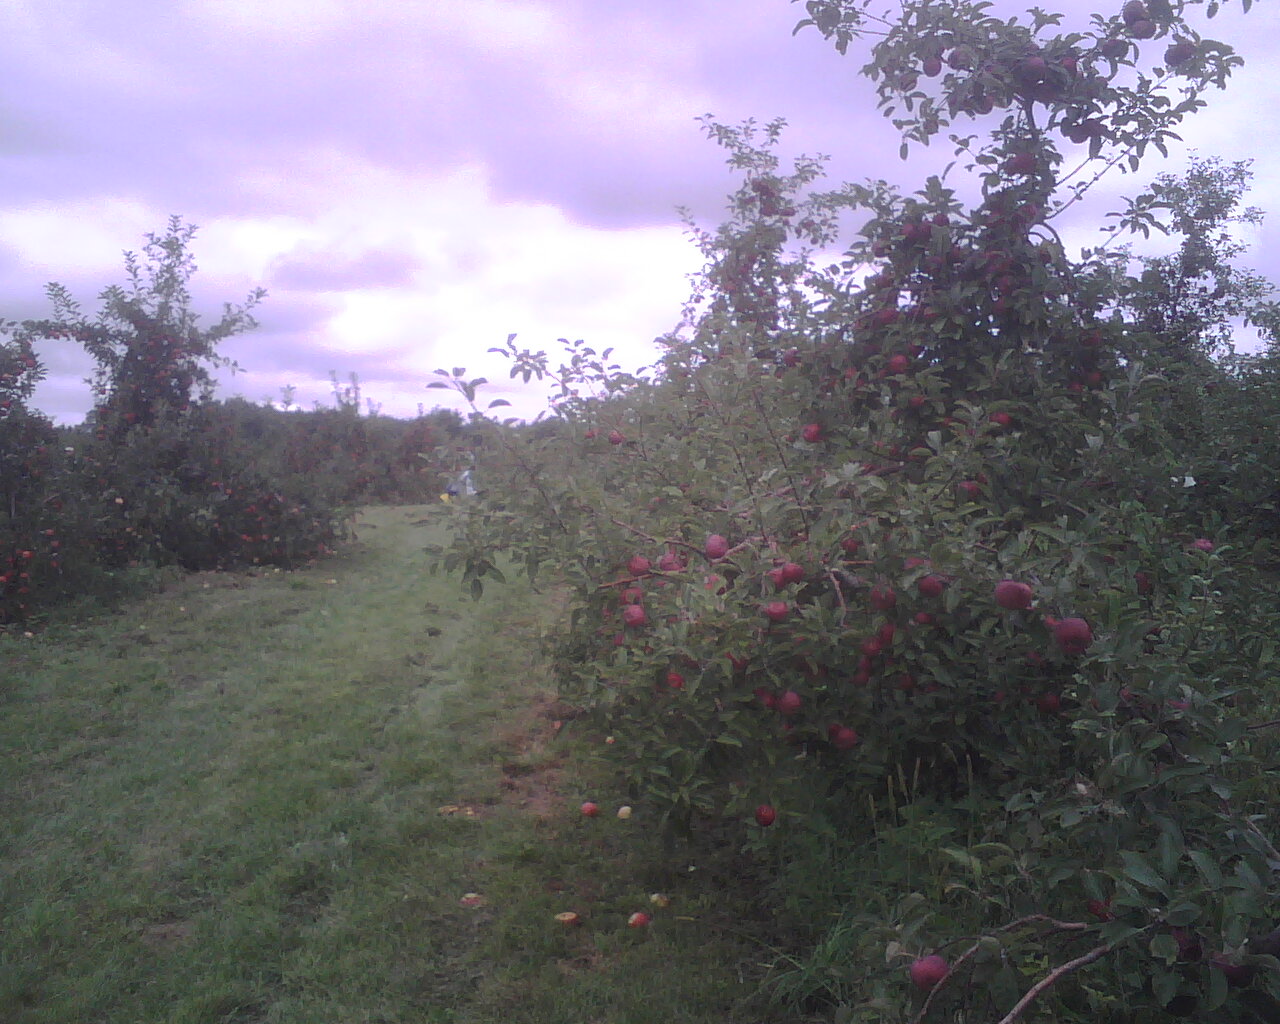 apple trees in an orchard with lots of green apples on the trees